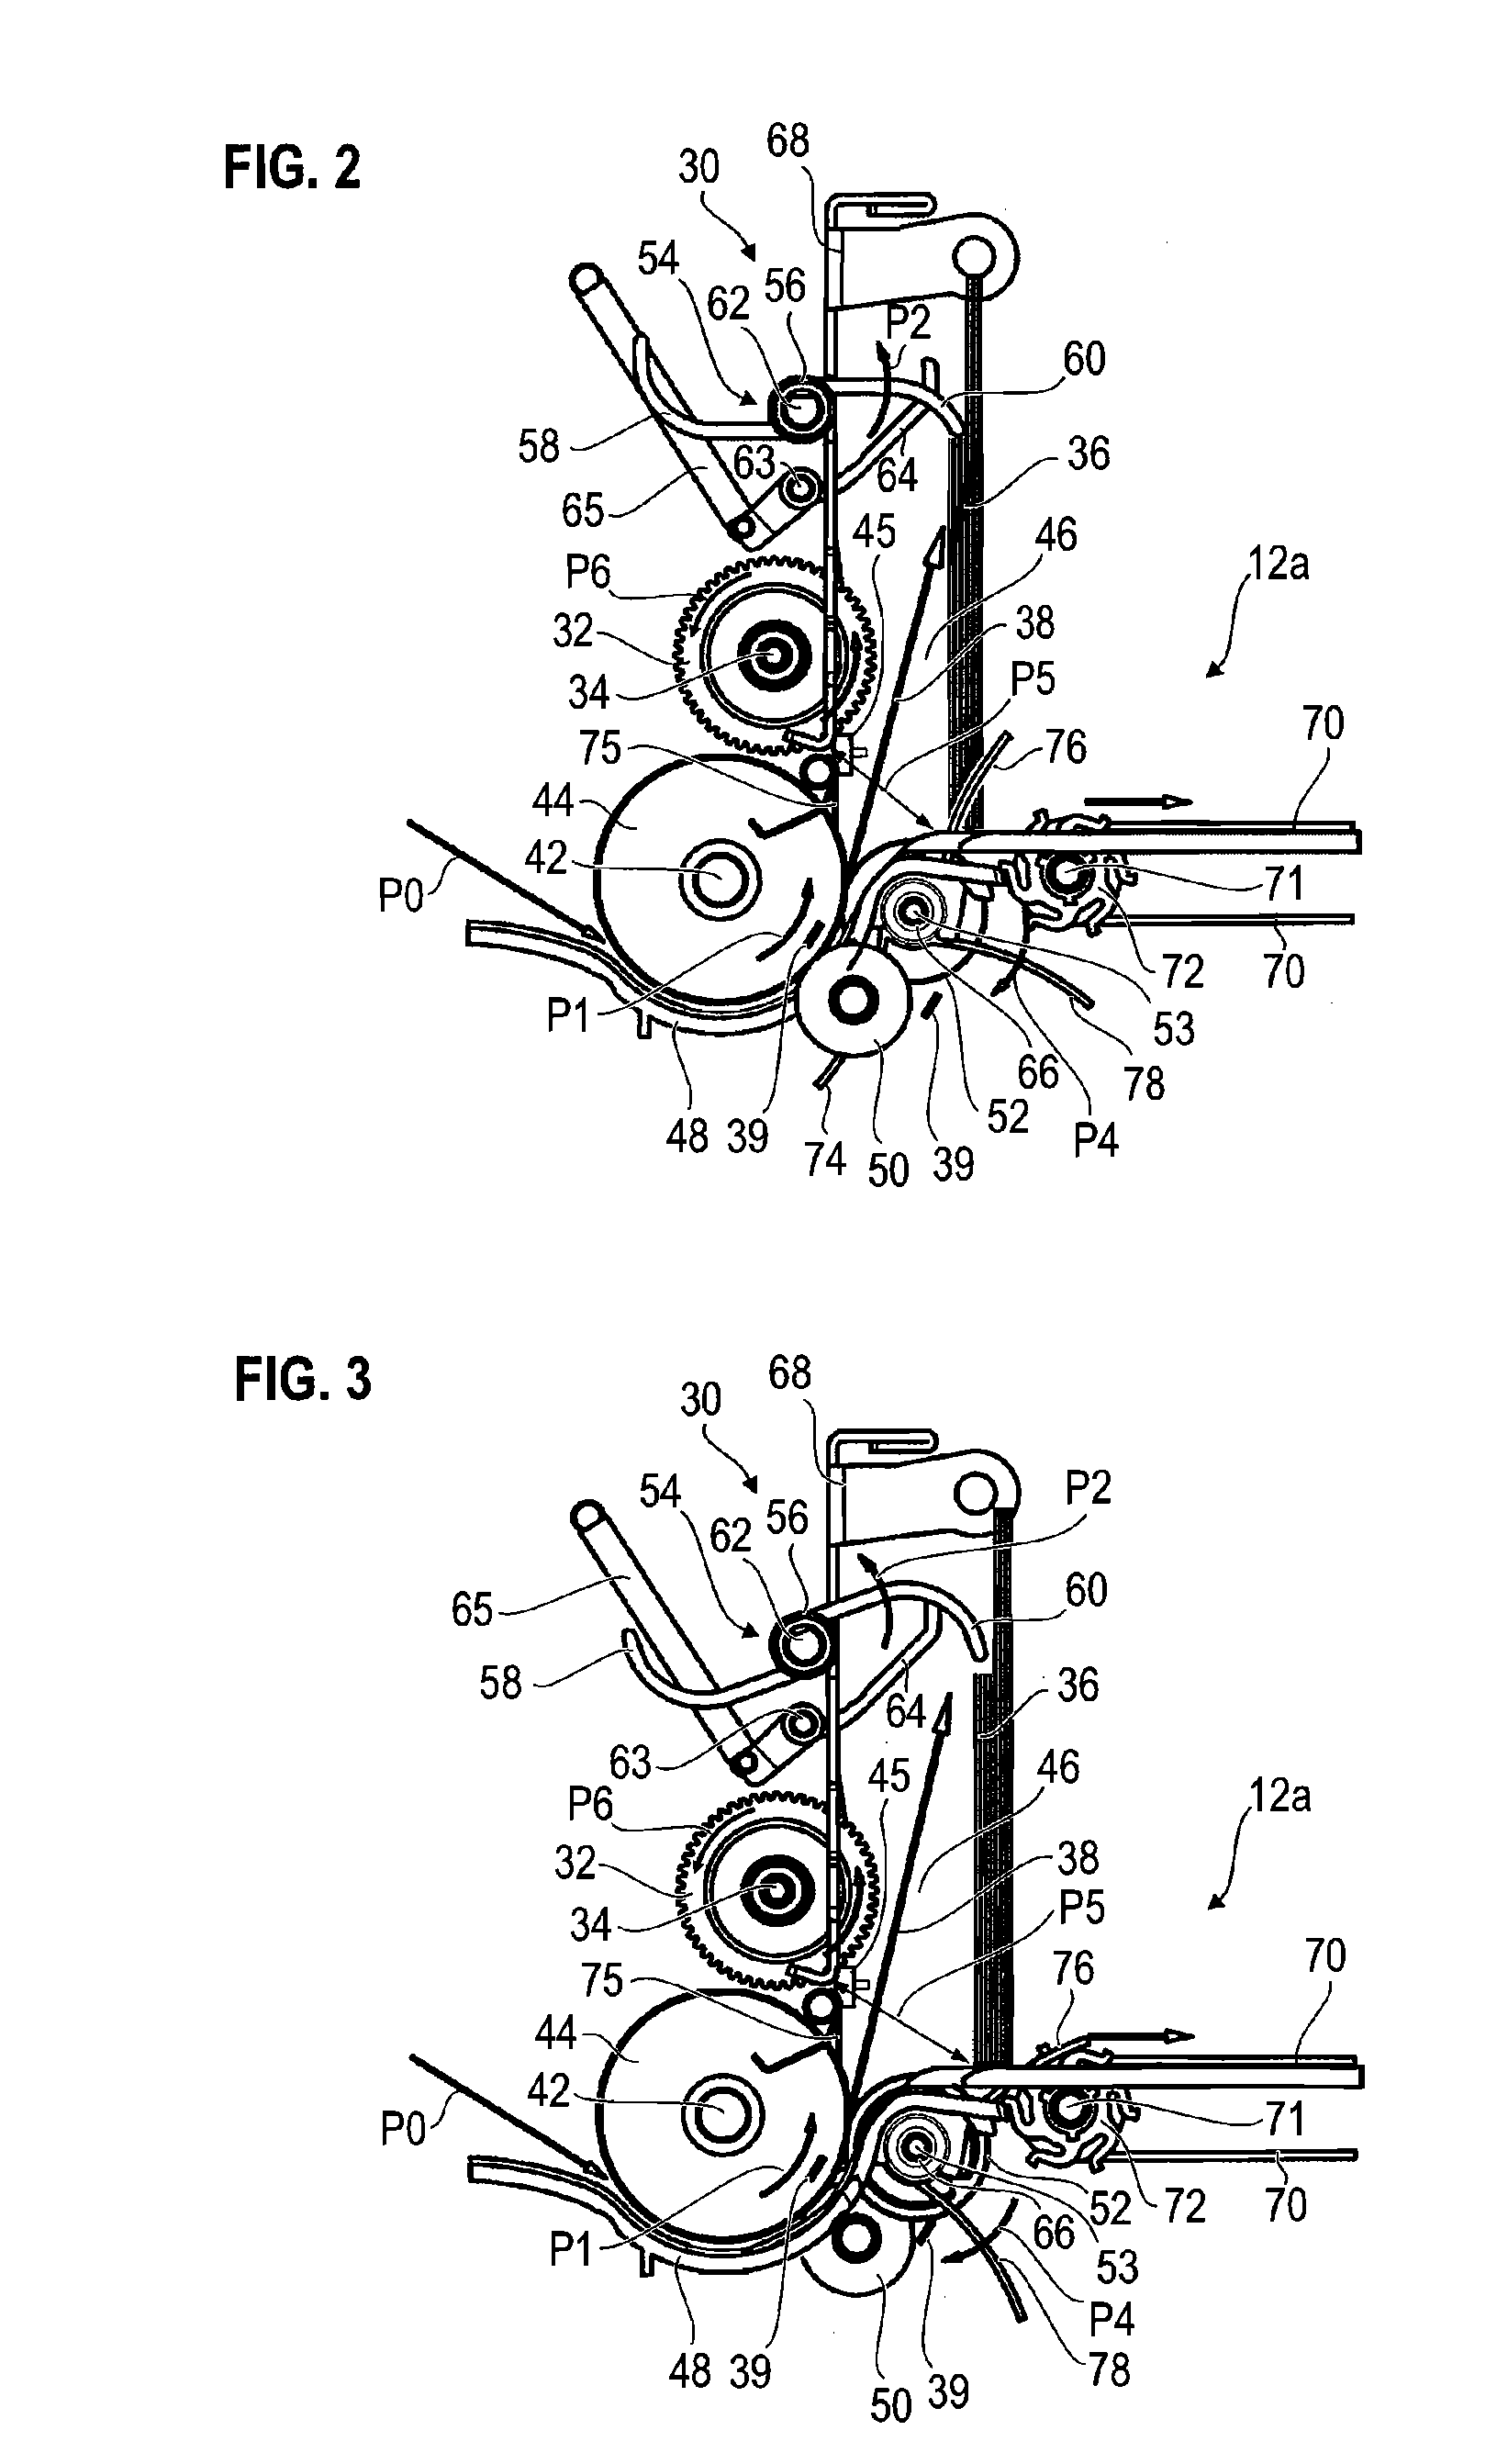 Device for handling single sheets, for introducing and distributing rectangular single sheets, especially bank notes, respectively into and out of a container